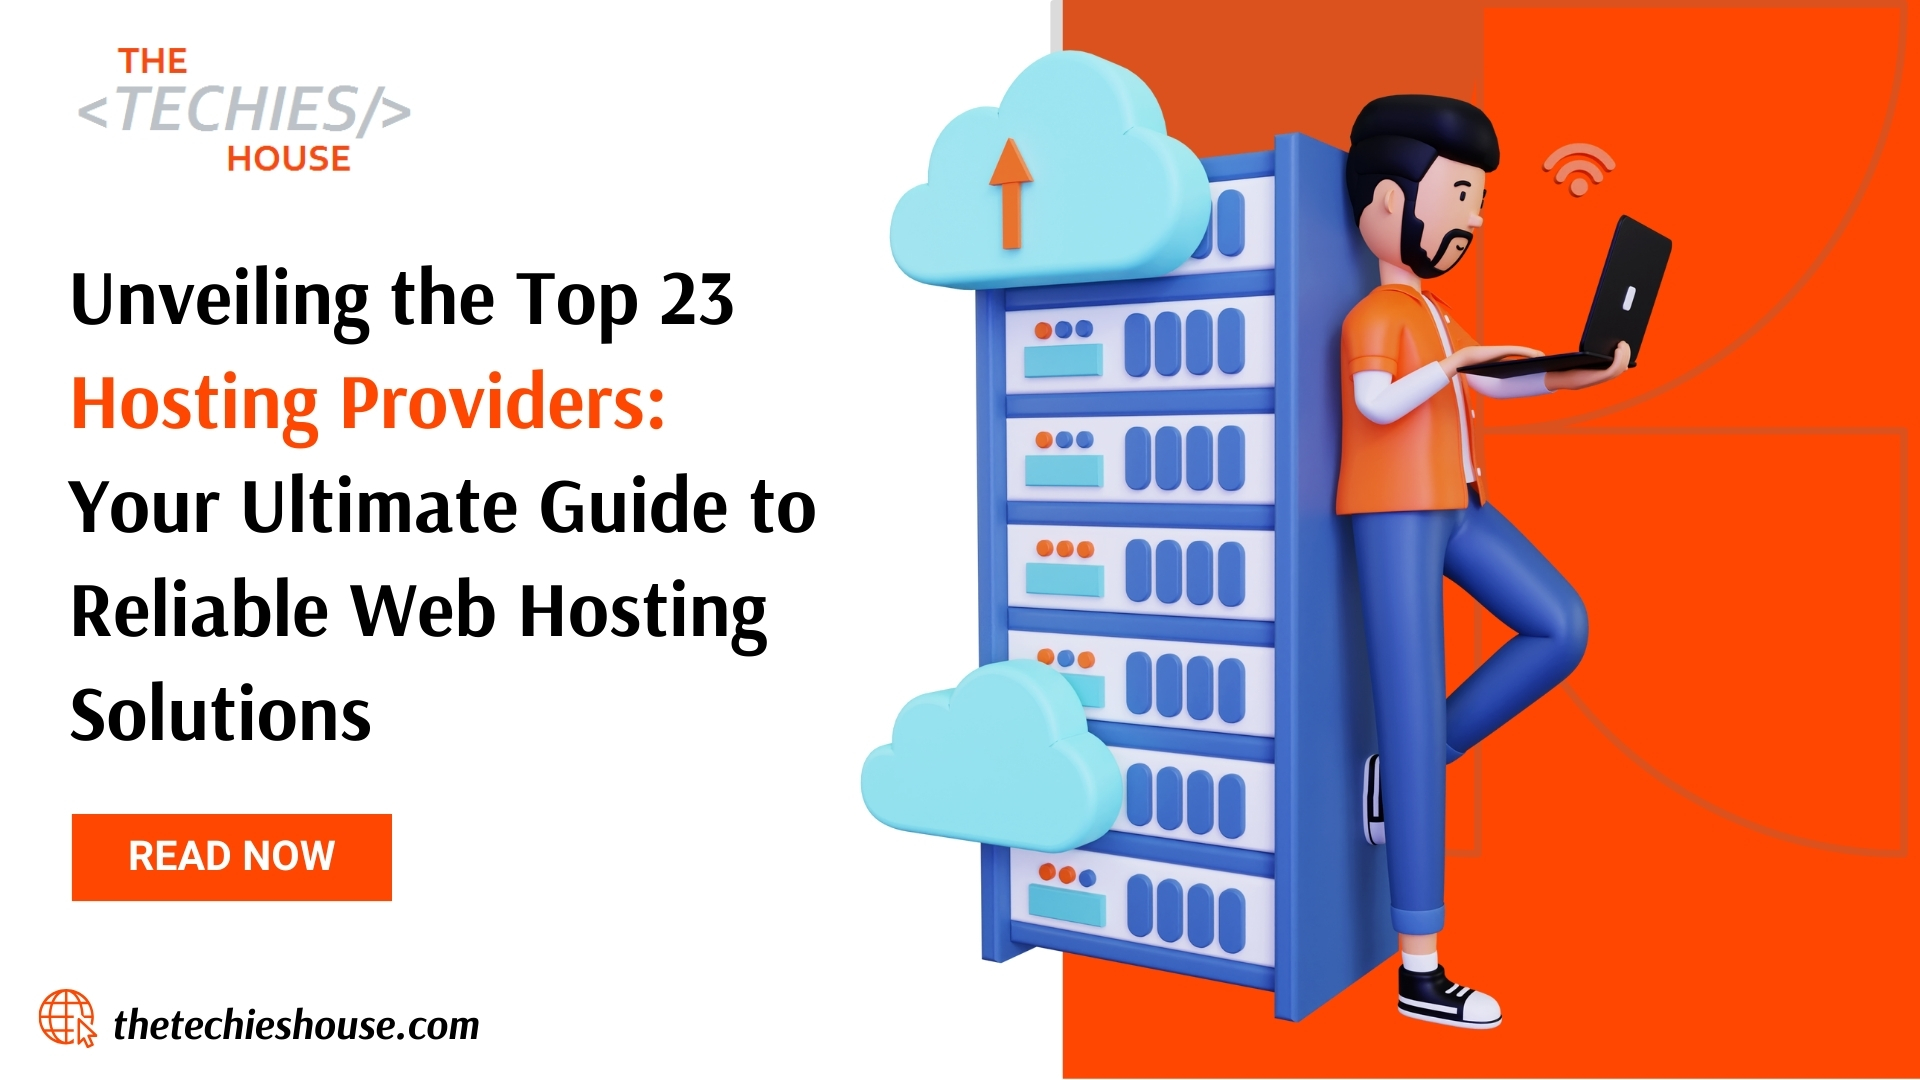 Unveiling the Top 23 Hosting Providers: Your Ultimate Guide to Reliable Web Hosting Solutions